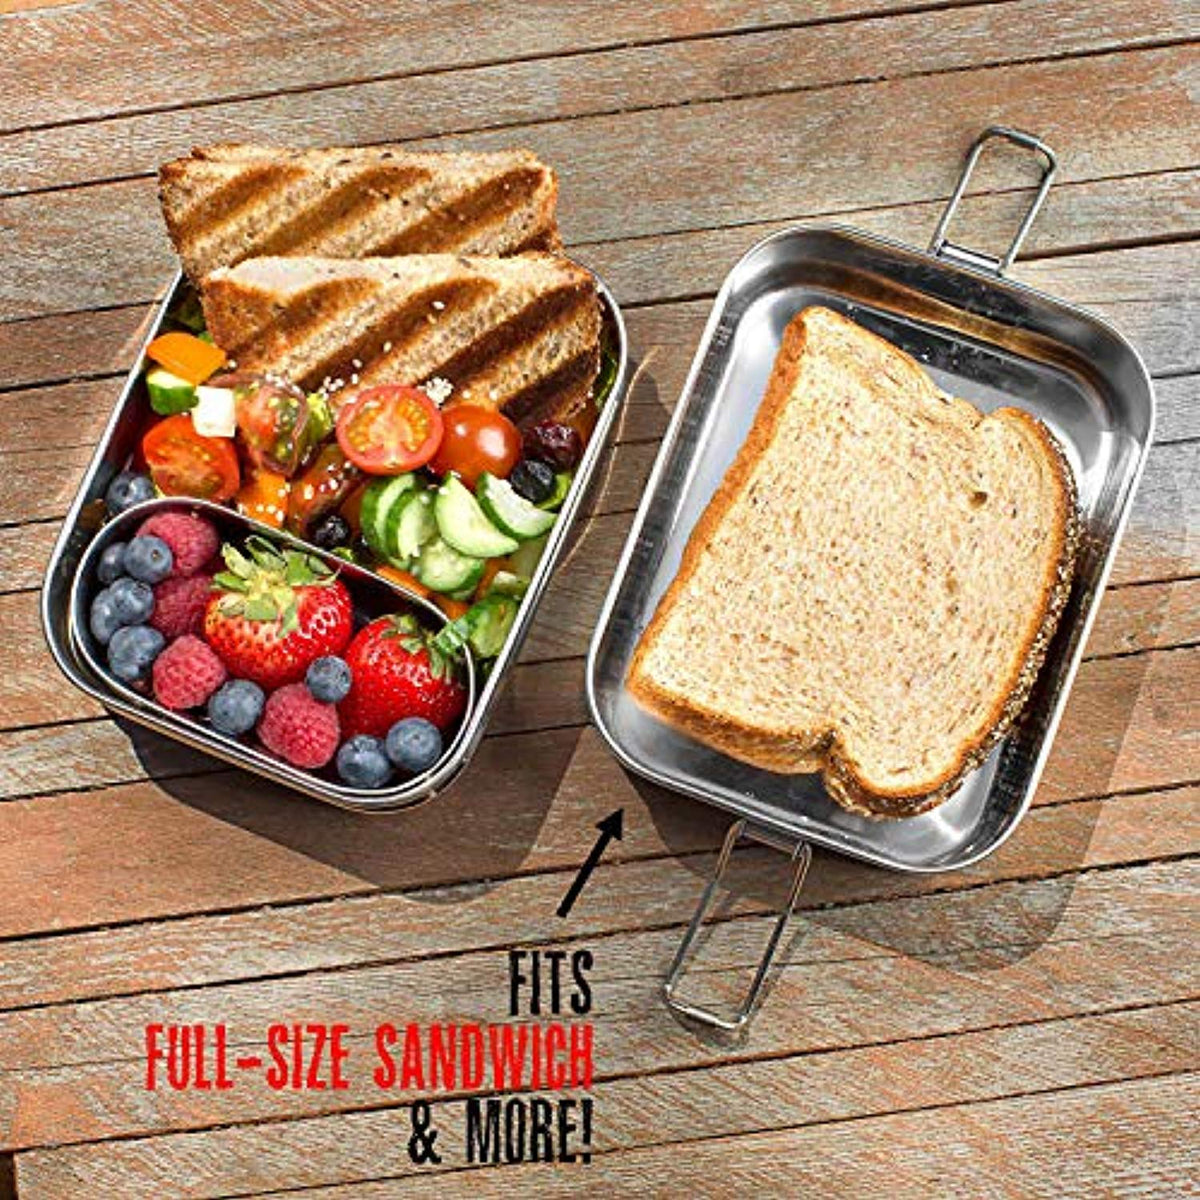  3-in-1 Stainless Steel Bento Box For Adults with Snack Pod -  Holds 6 Cups of Food, 100% Crack-Resistant, Secure Locks, Eco-friendly Metal  Lunch box Container: Home & Kitchen